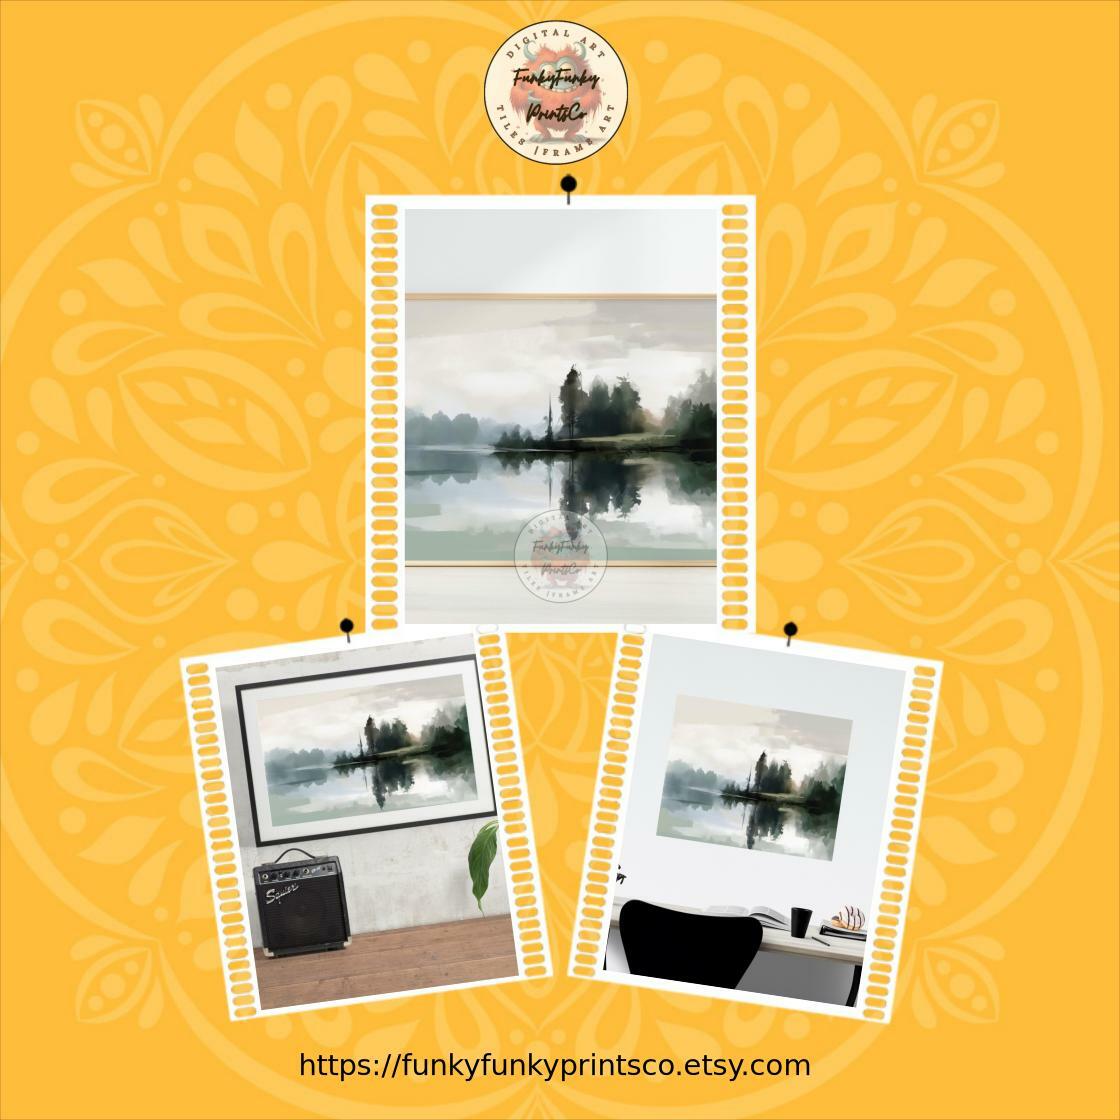 Limited offer! This awesome Lake Landscape Painting, Digital Prints, Watercolor Painting, Vintage Landscape Painting, Lake House Decor, Muted Landscape Print for $5.50.. 
etsy.me/3PJXJc0
#LandscapePainting #PrintableWallArt